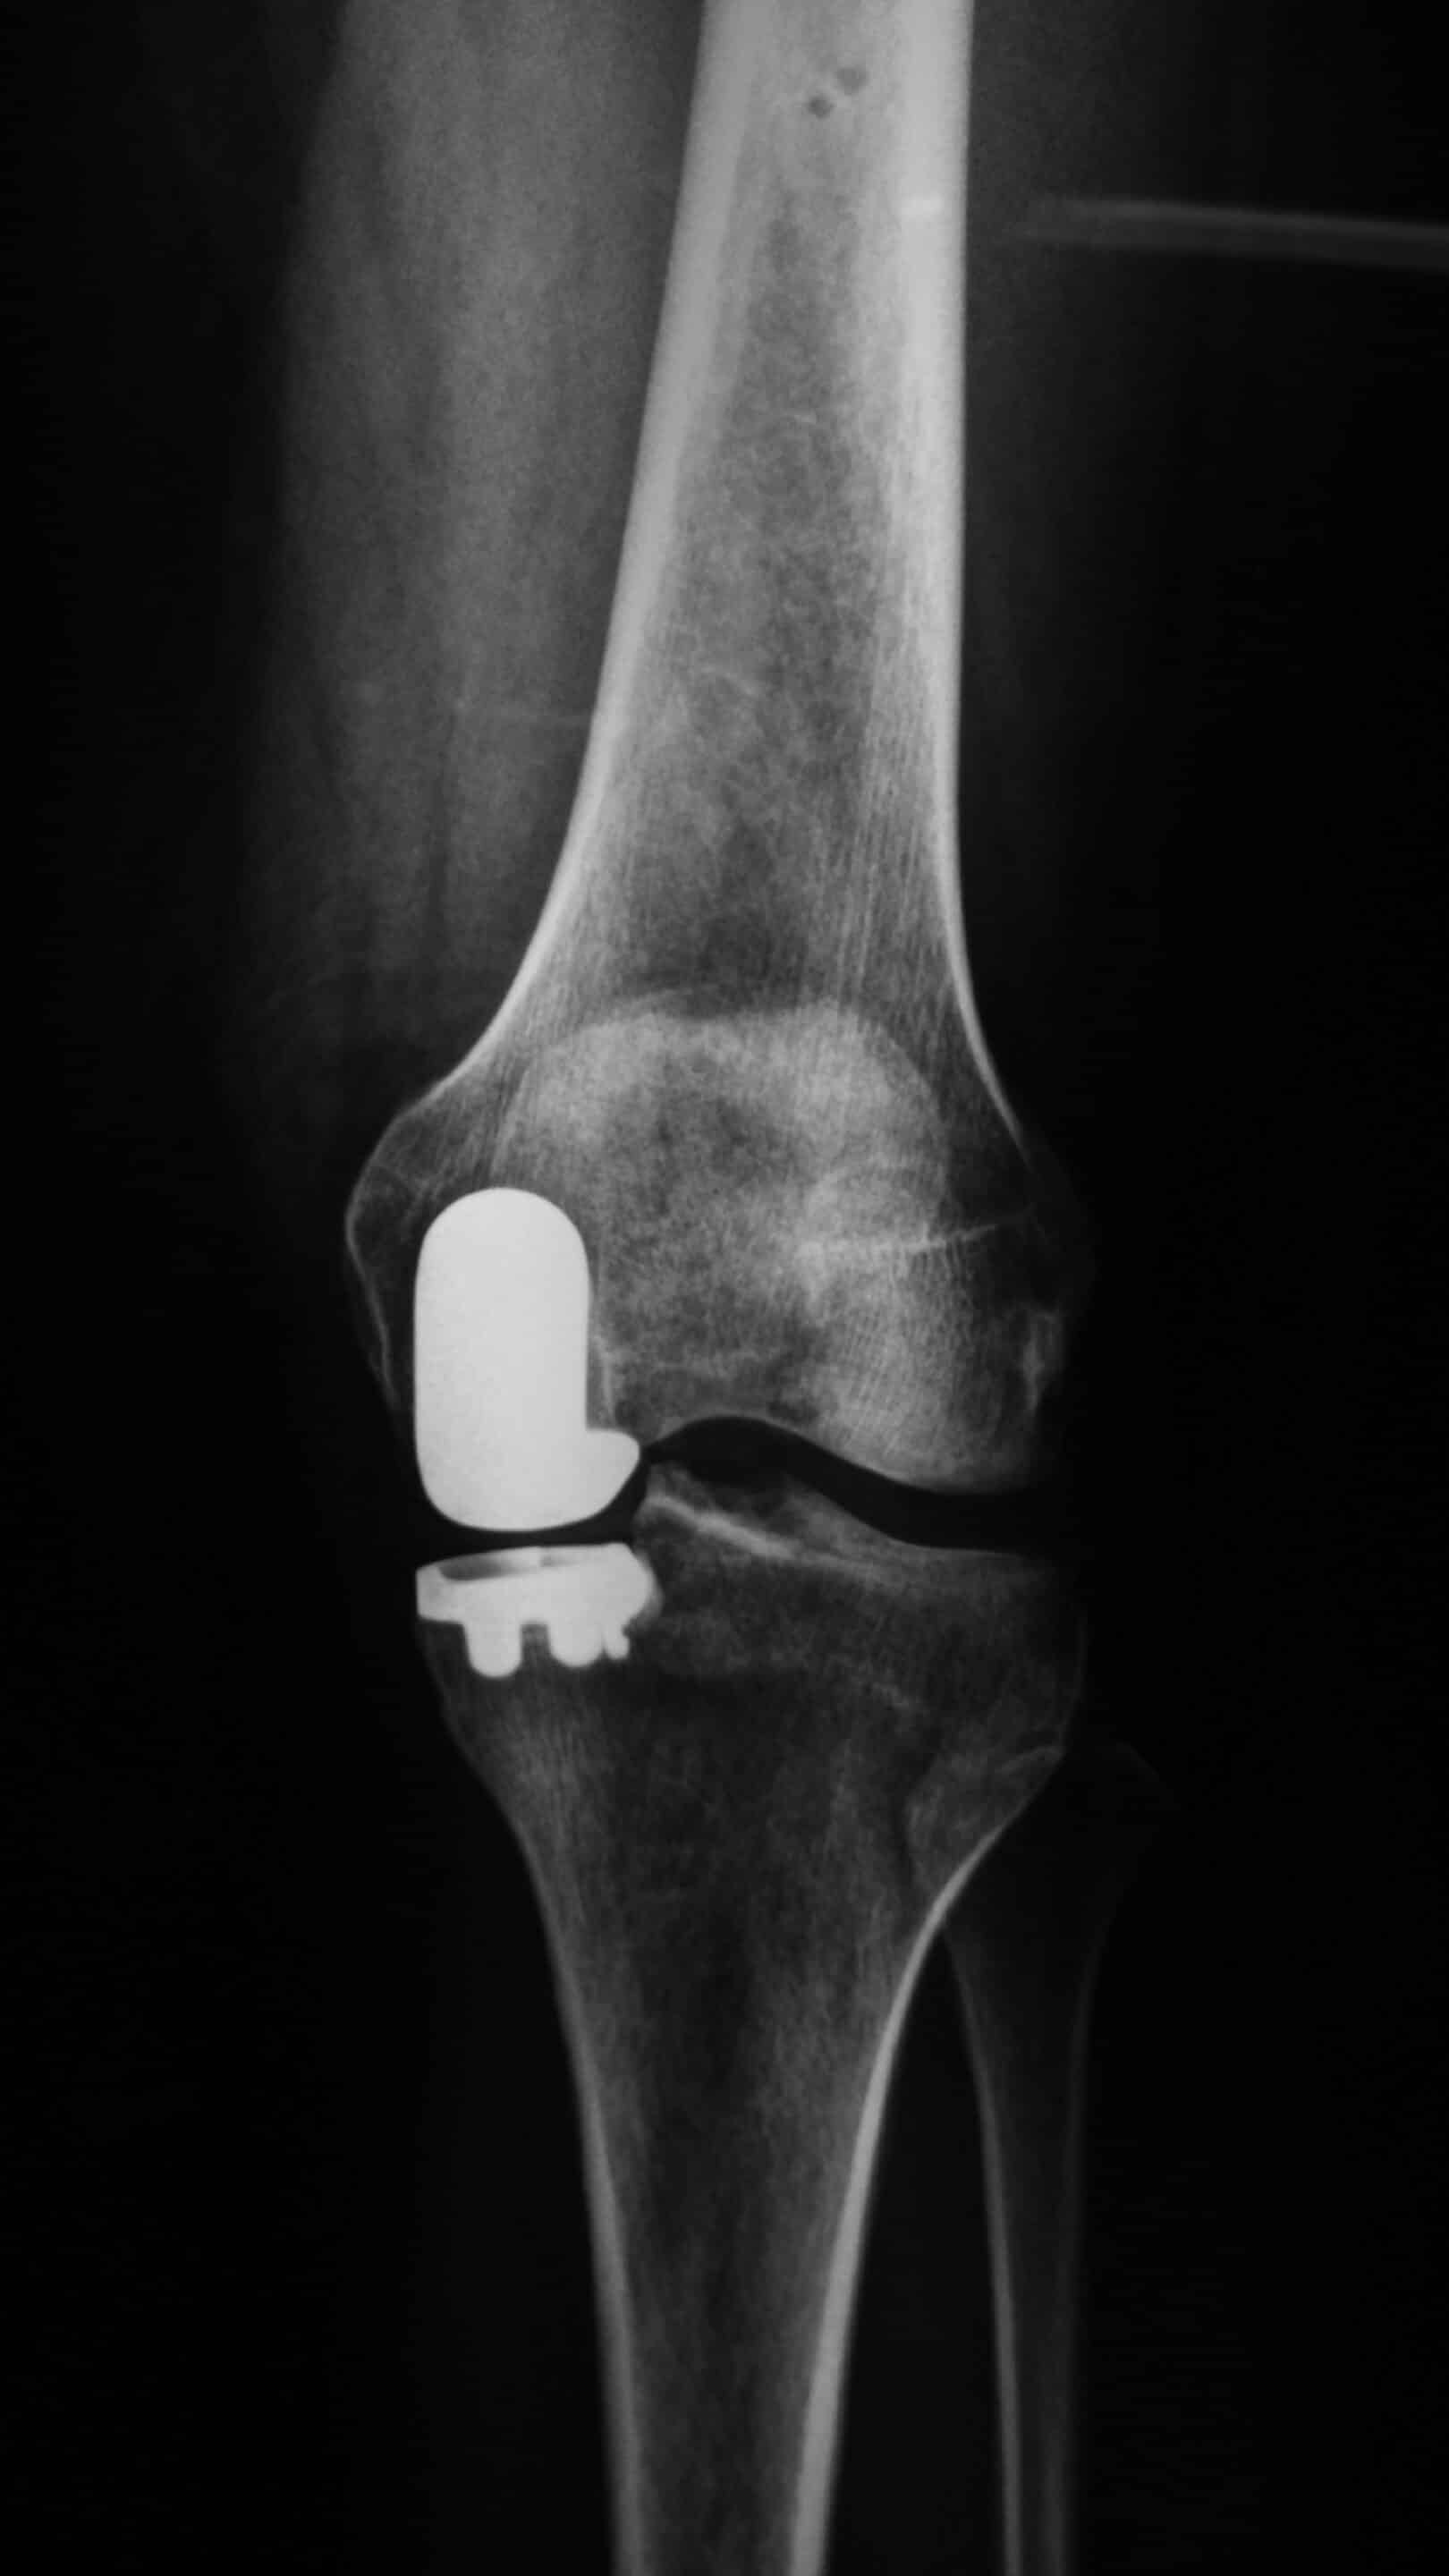 Failure of Uni-Compartmental Knee Replacements